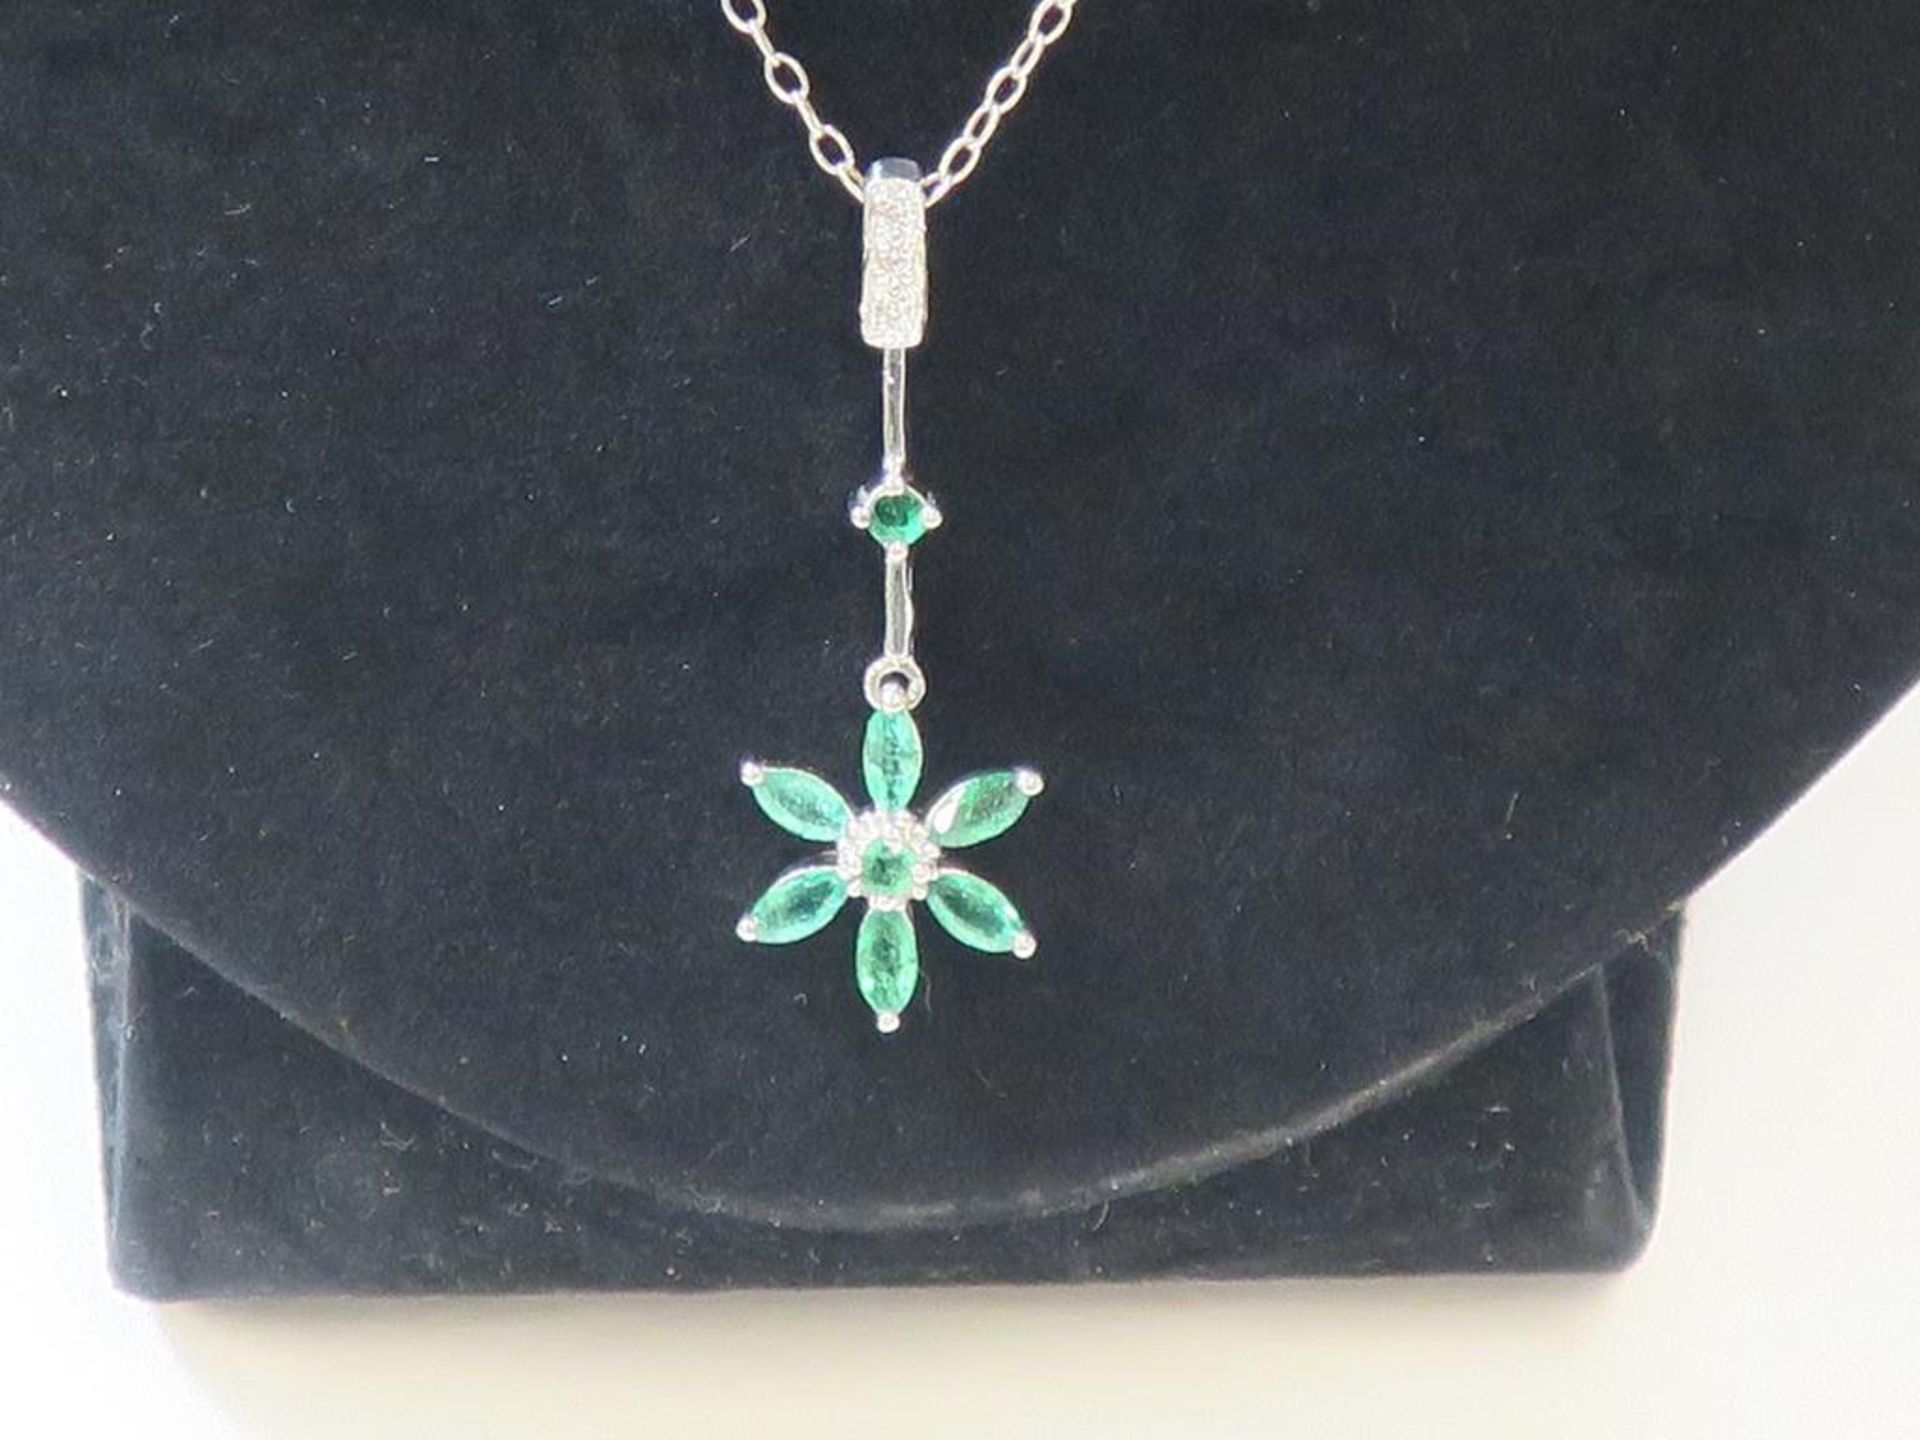 A Silver, Emerald and Diamond Necklace (est £40-£80) - Image 2 of 3